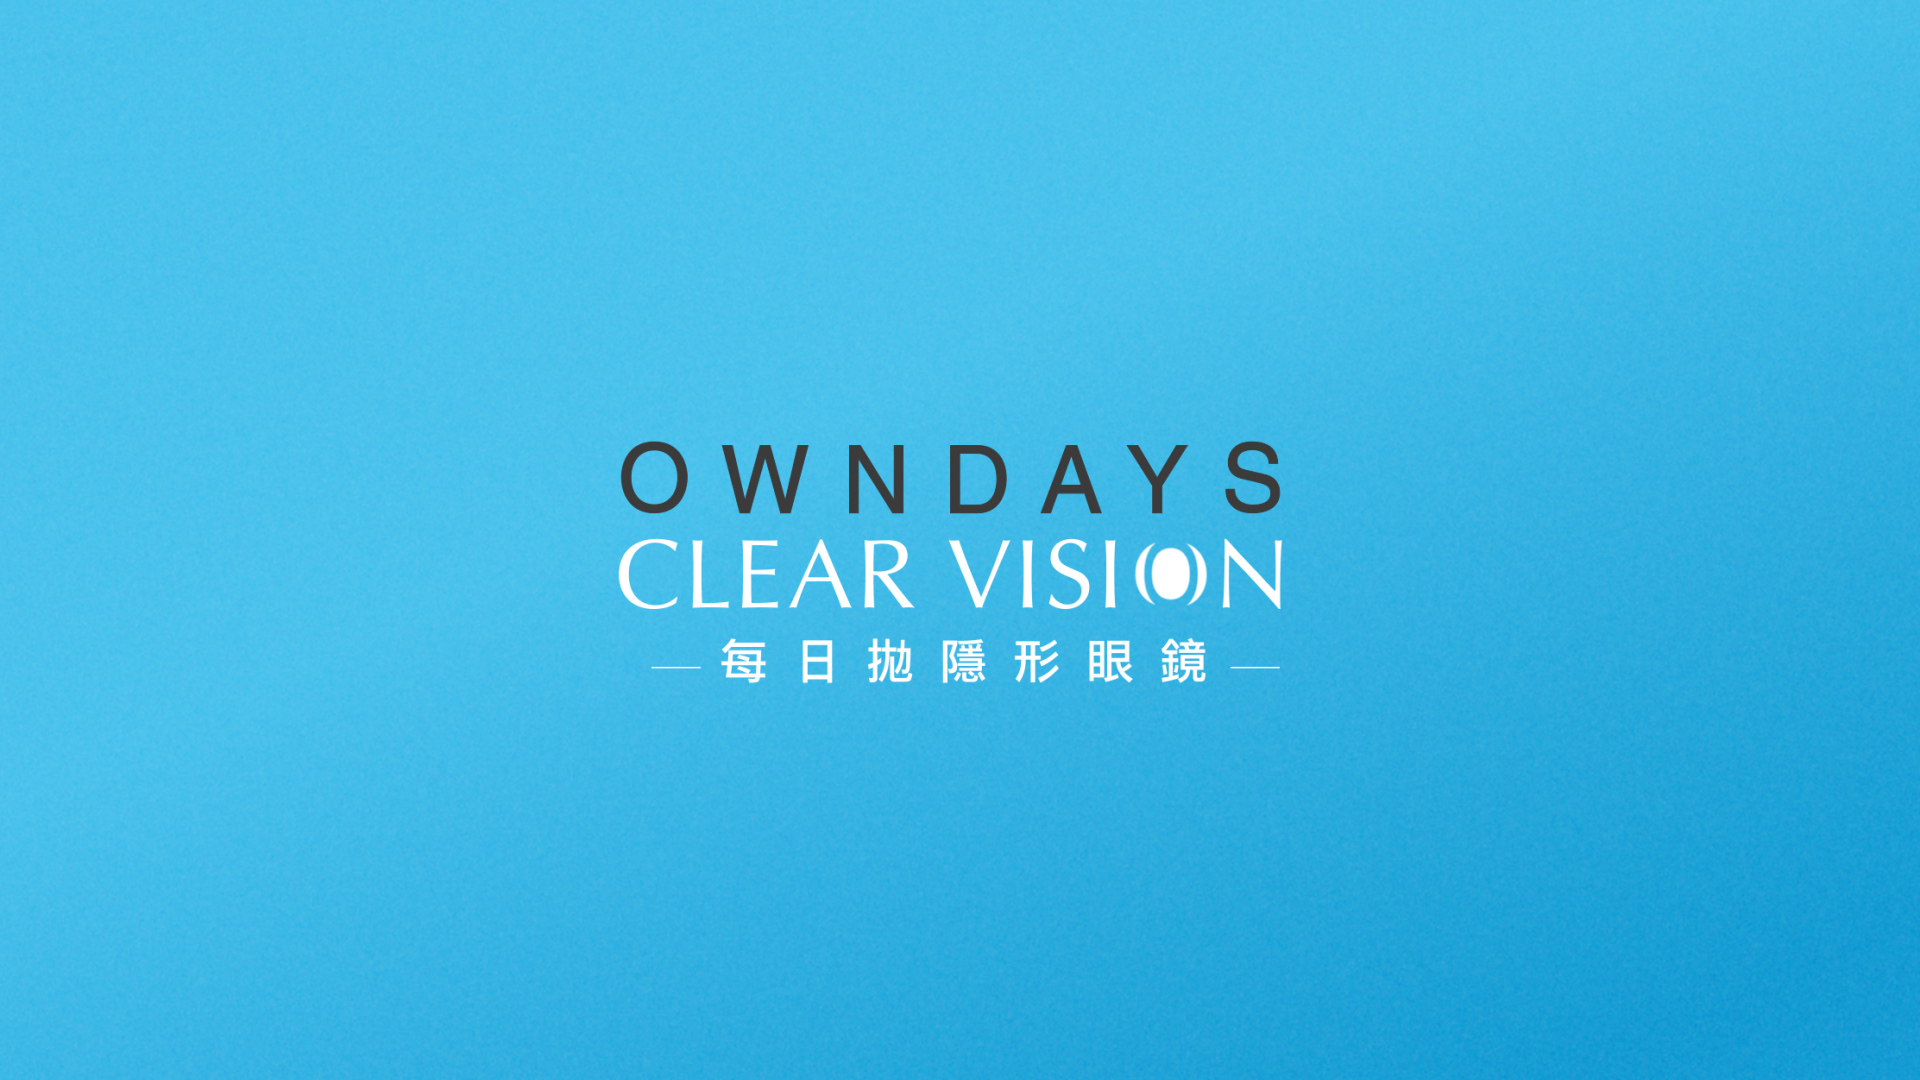 OWNDAYS CLEAR VISION MOVIE